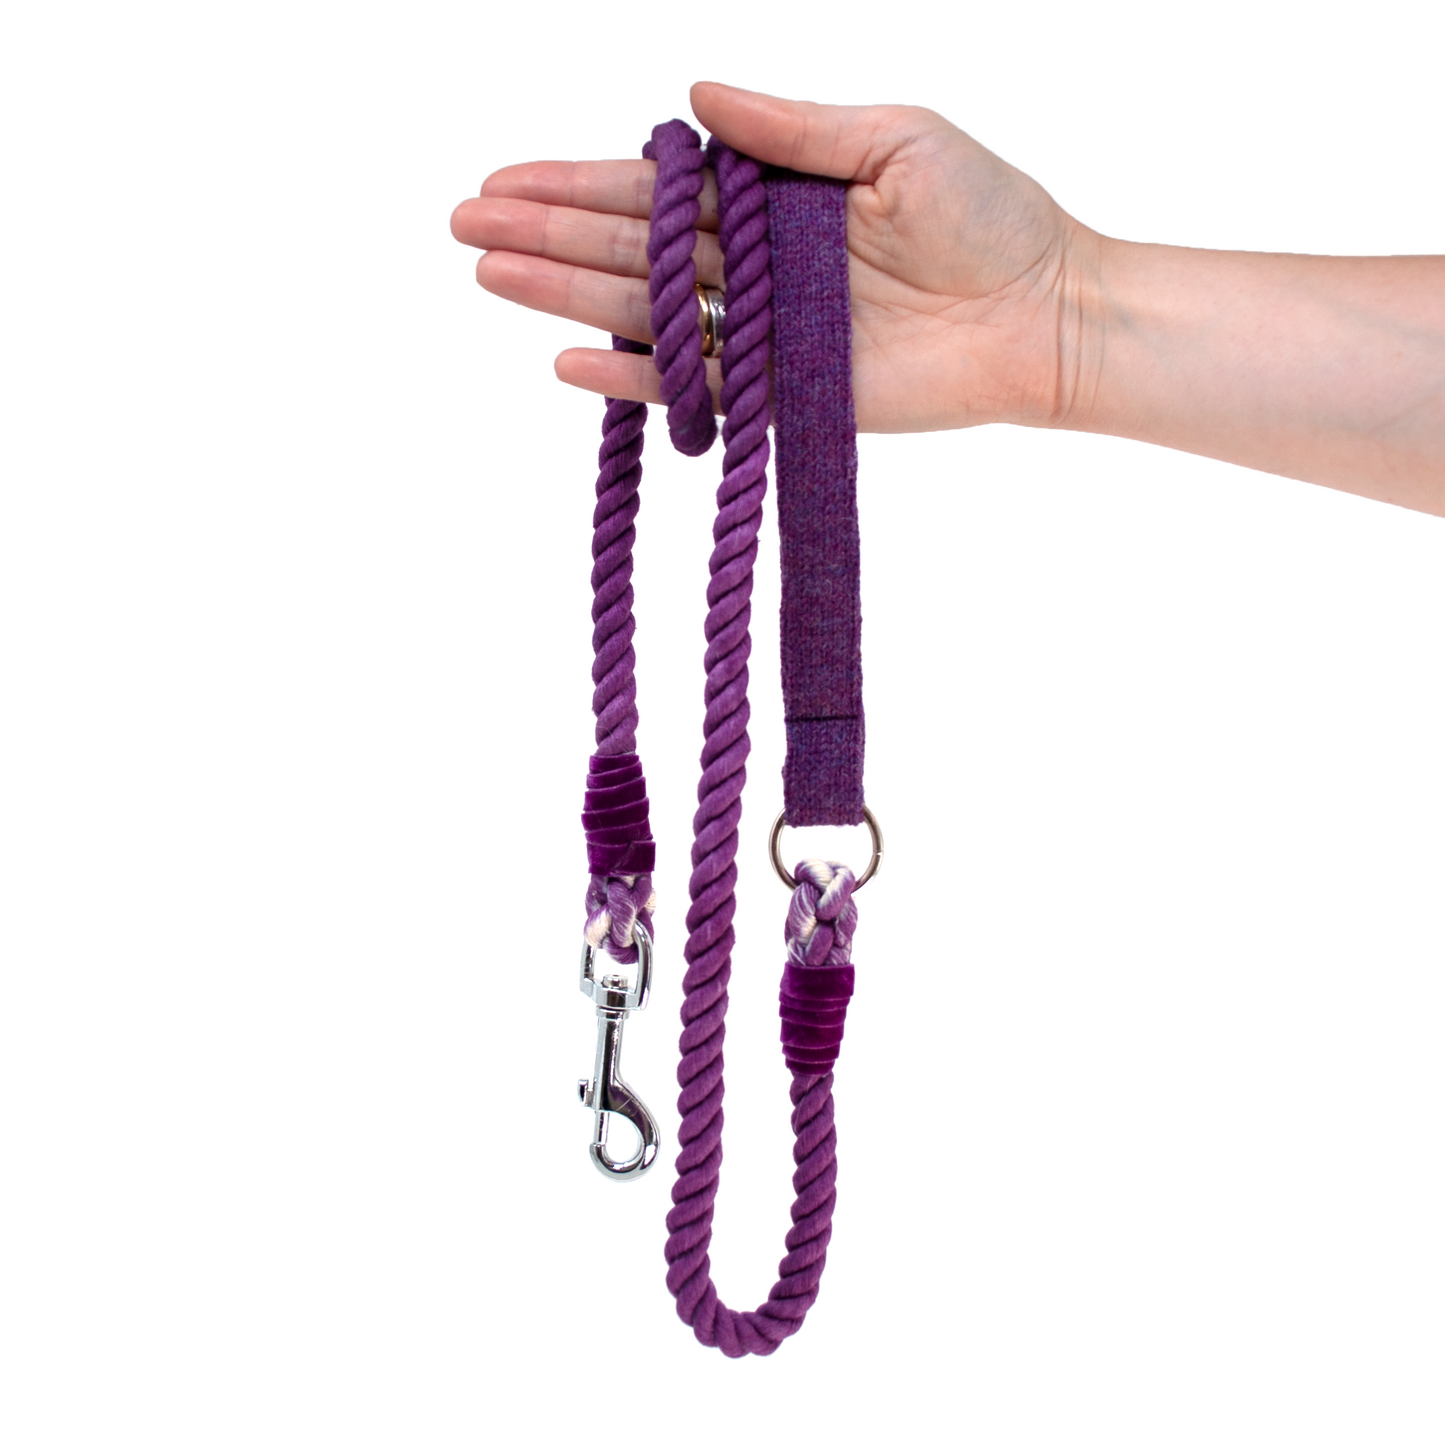 Parma - Autumn/Winter '23 Collection - Luxury Rope Dog Lead